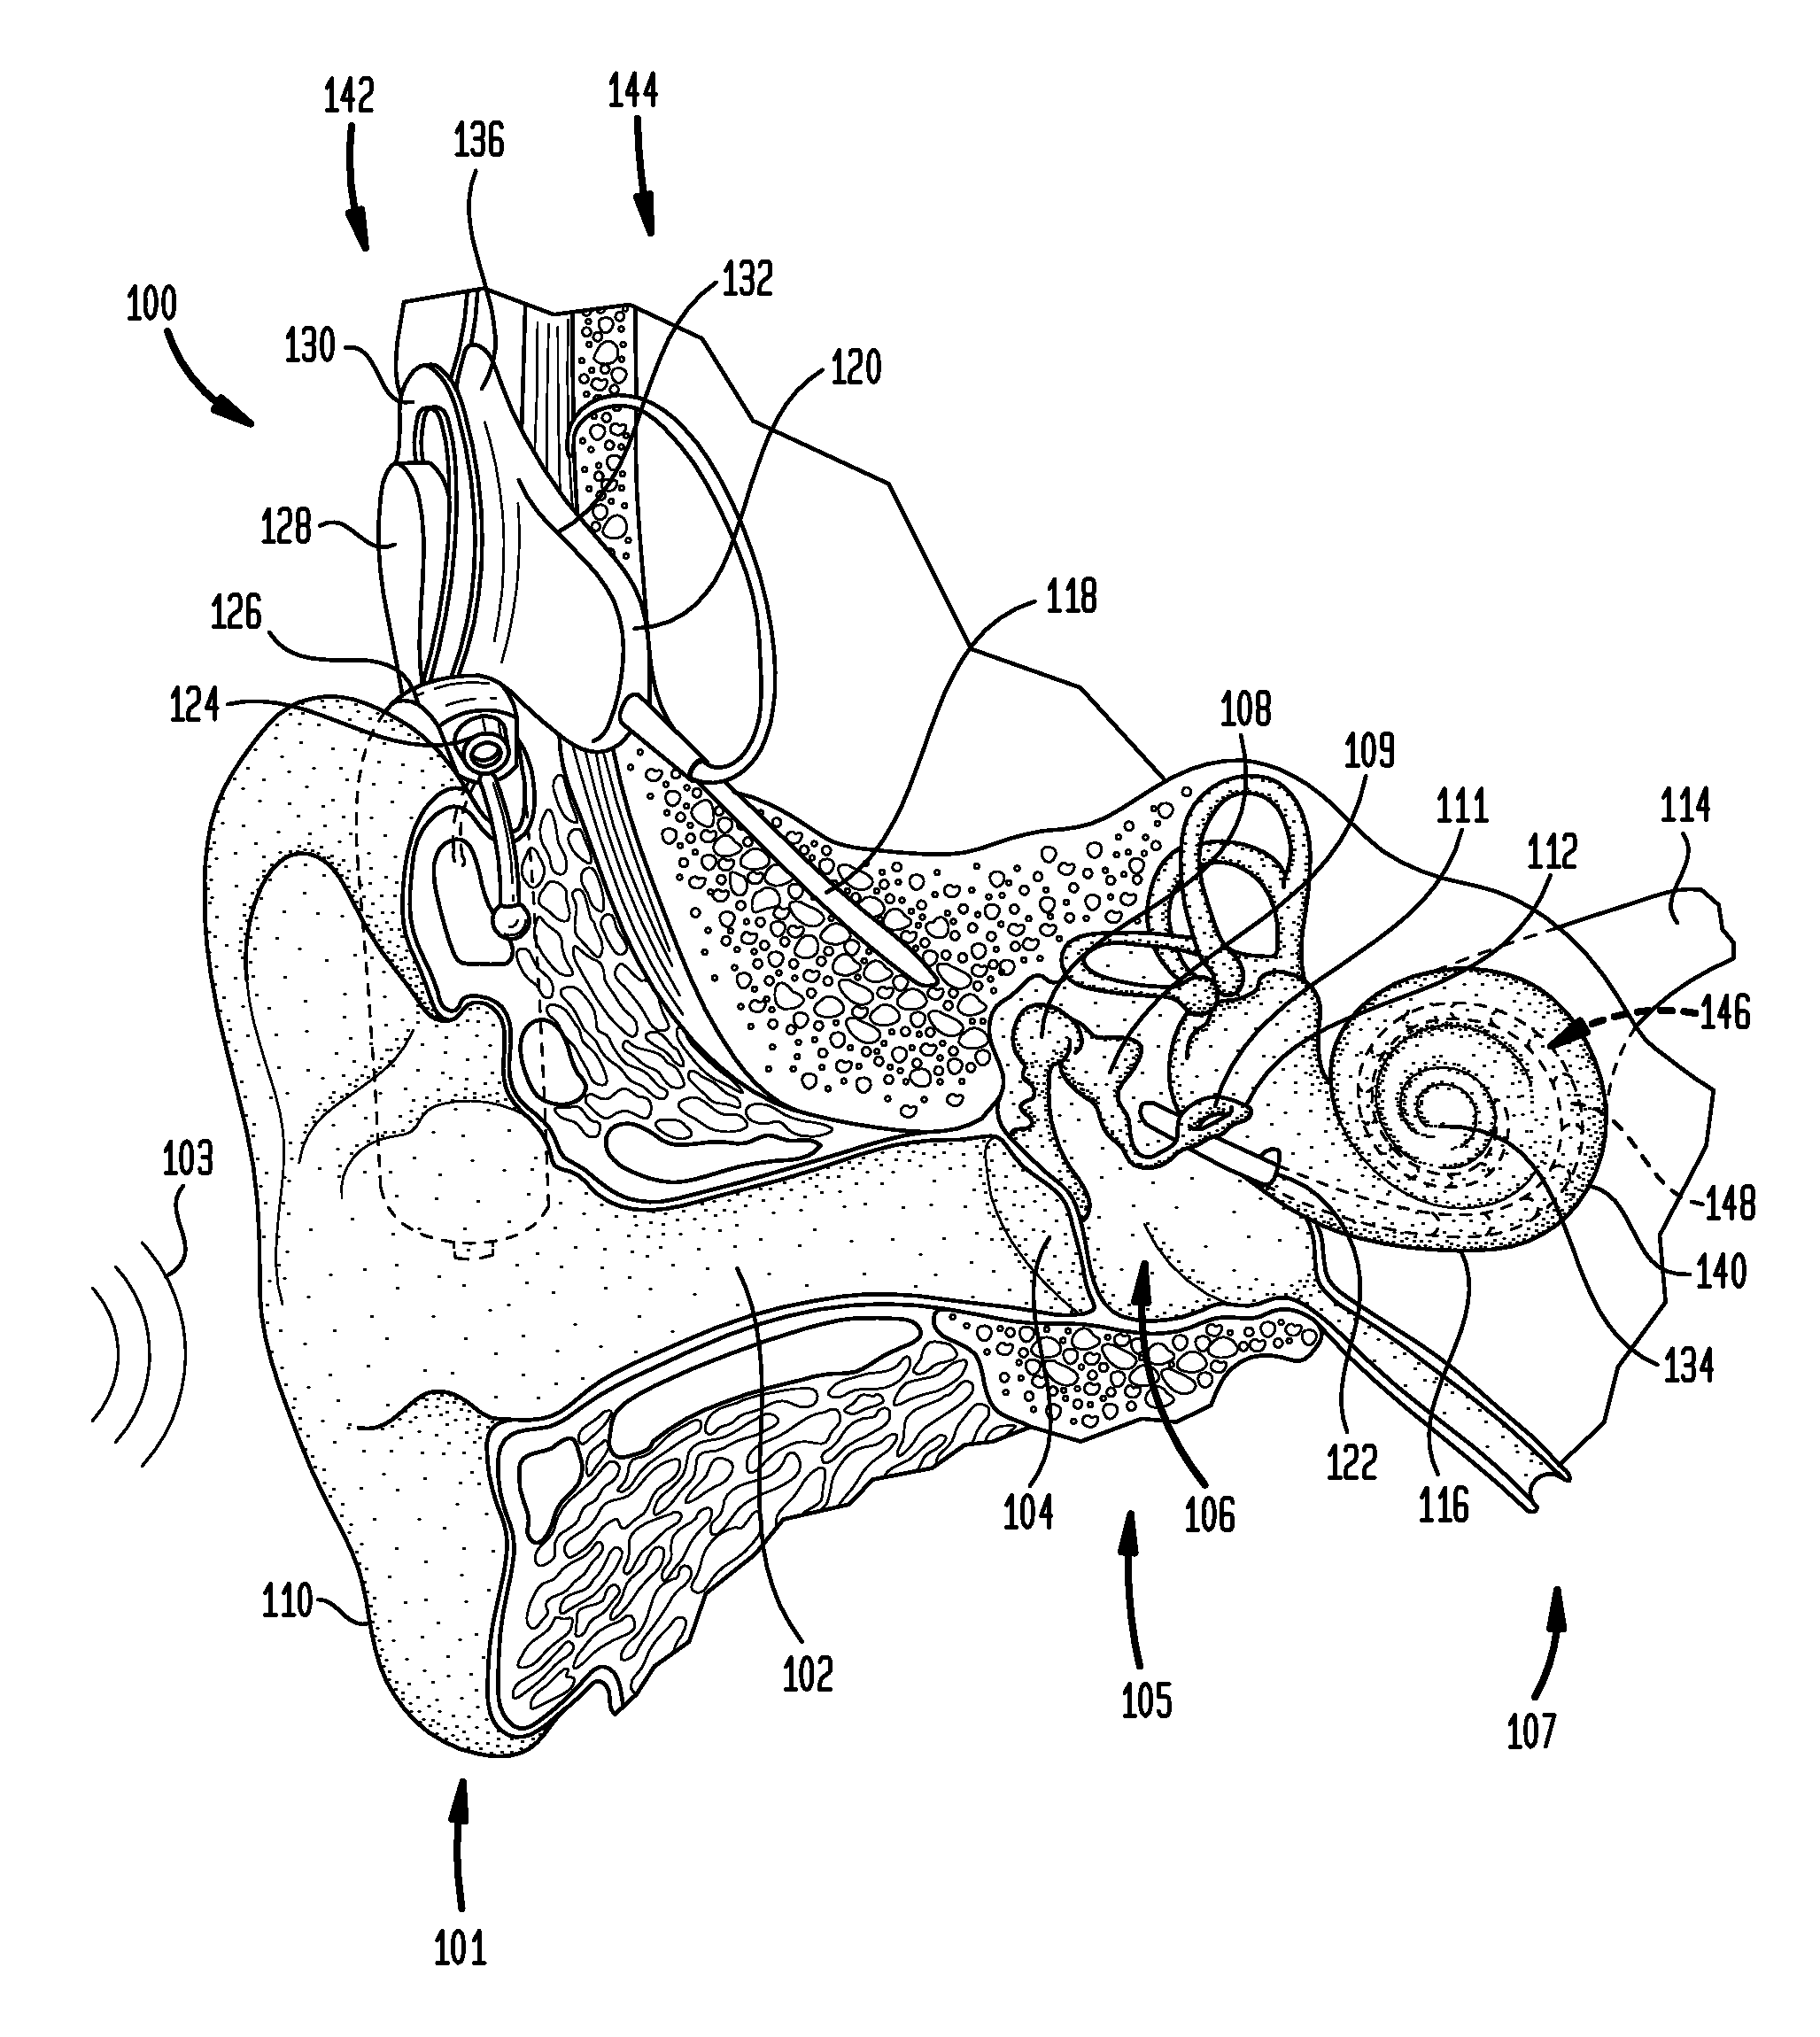 Manufacturing an electrode carrier for an implantable medical device